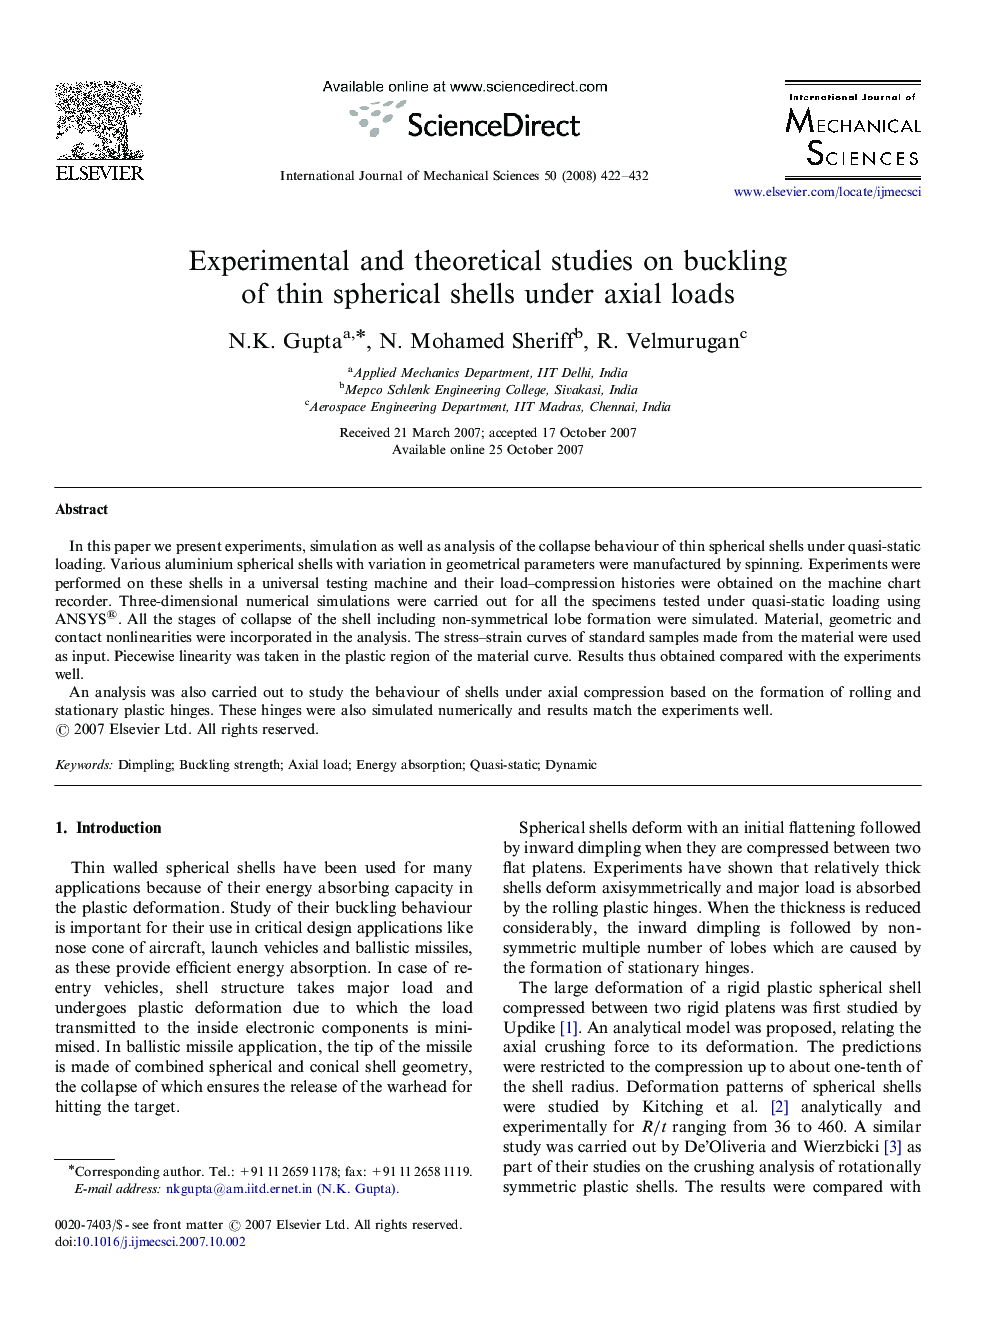 Experimental and theoretical studies on buckling of thin spherical shells under axial loads